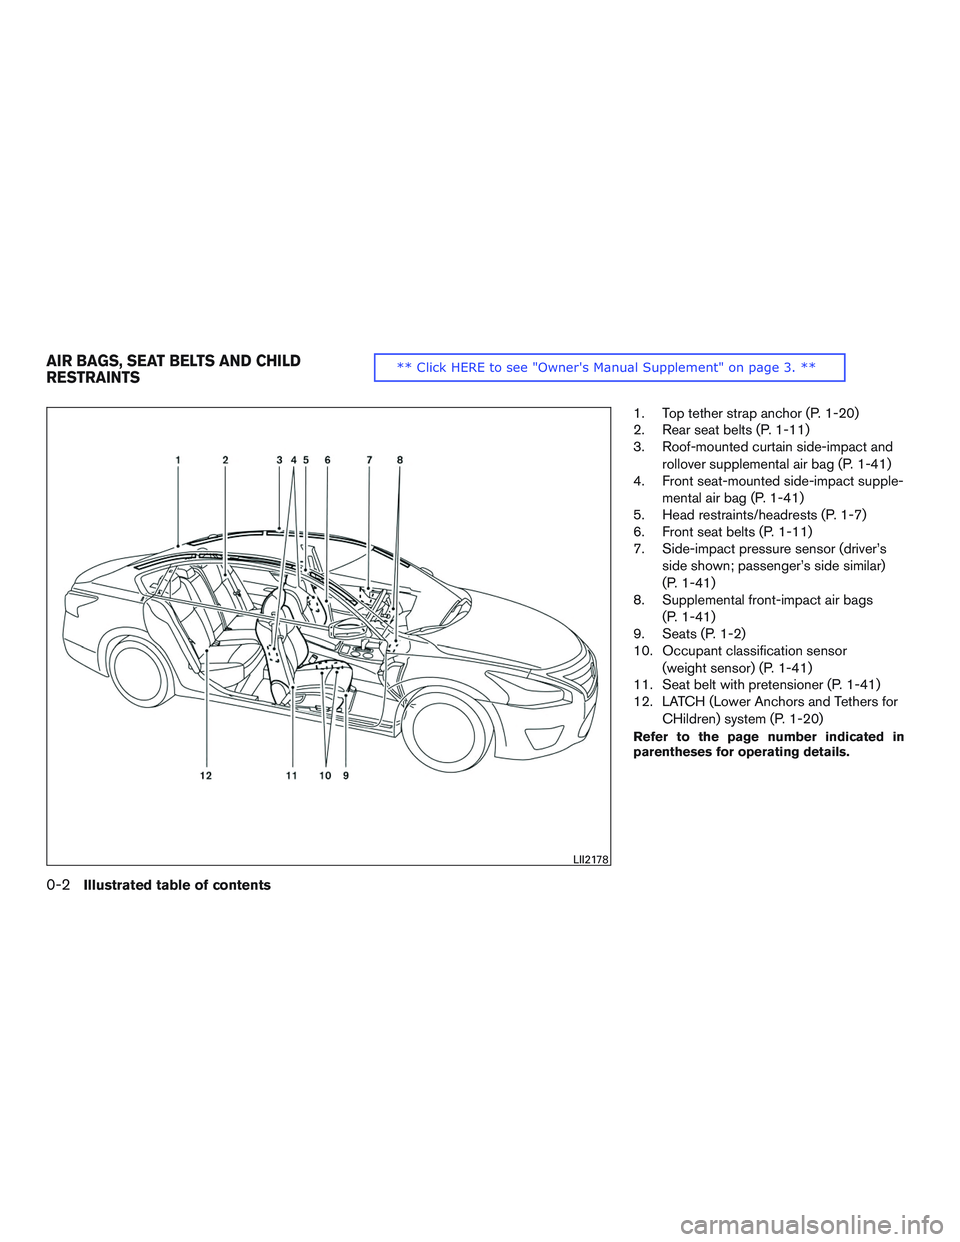 NISSAN ALTIMA SEDAN 2015 User Guide 1. Top tether strap anchor (P. 1-20)
2. Rear seat belts (P. 1-11)
3. Roof-mounted curtain side-impact androllover supplemental air bag (P. 1-41)
4. Front seat-mounted side-impact supple-
mental air ba